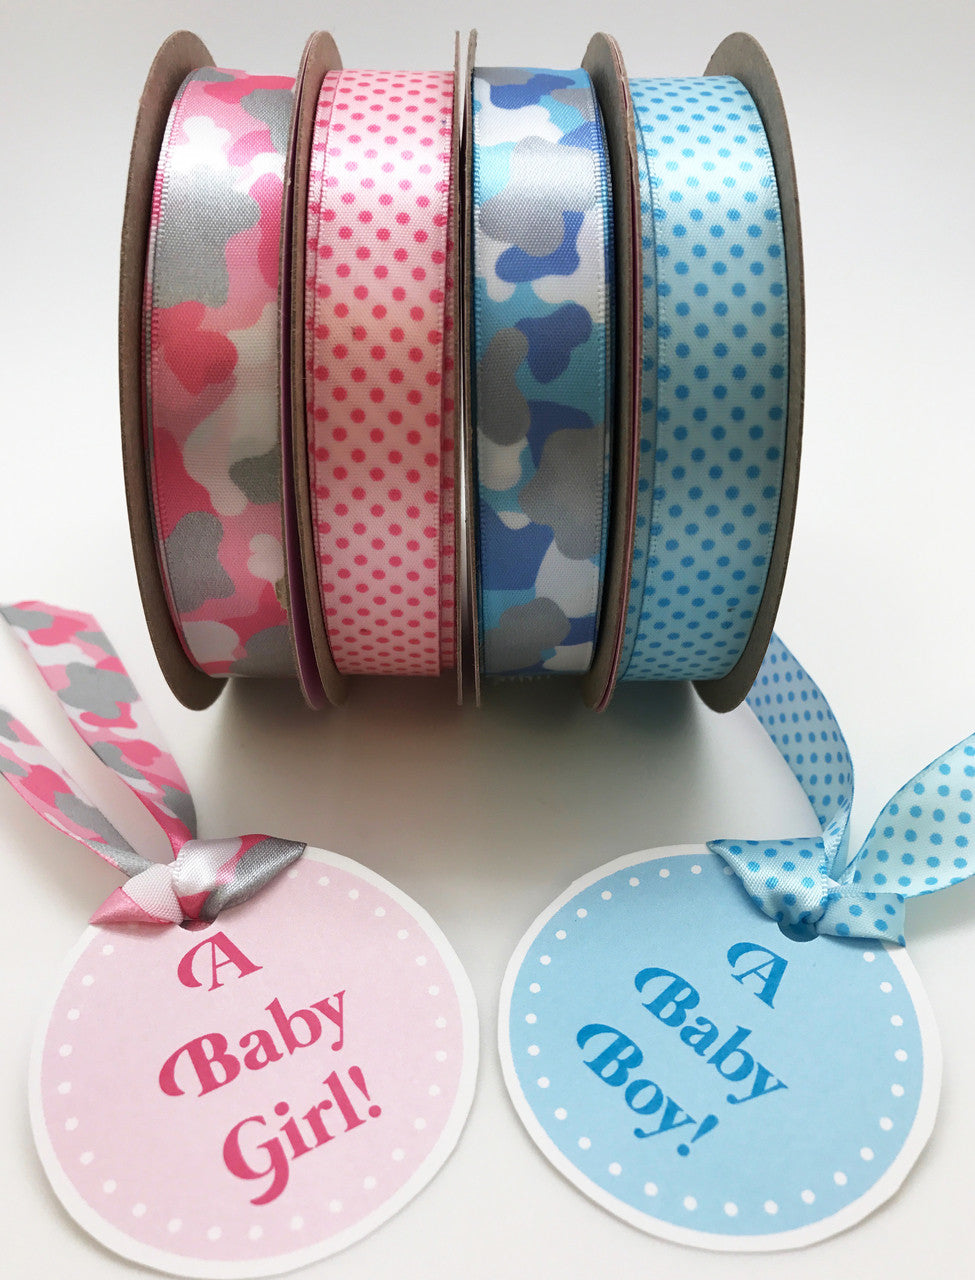 These blue pin dots are part of our baby collection. These dots can be mixed and matched with our blue and gray camouflage for a fun baby boy shower!